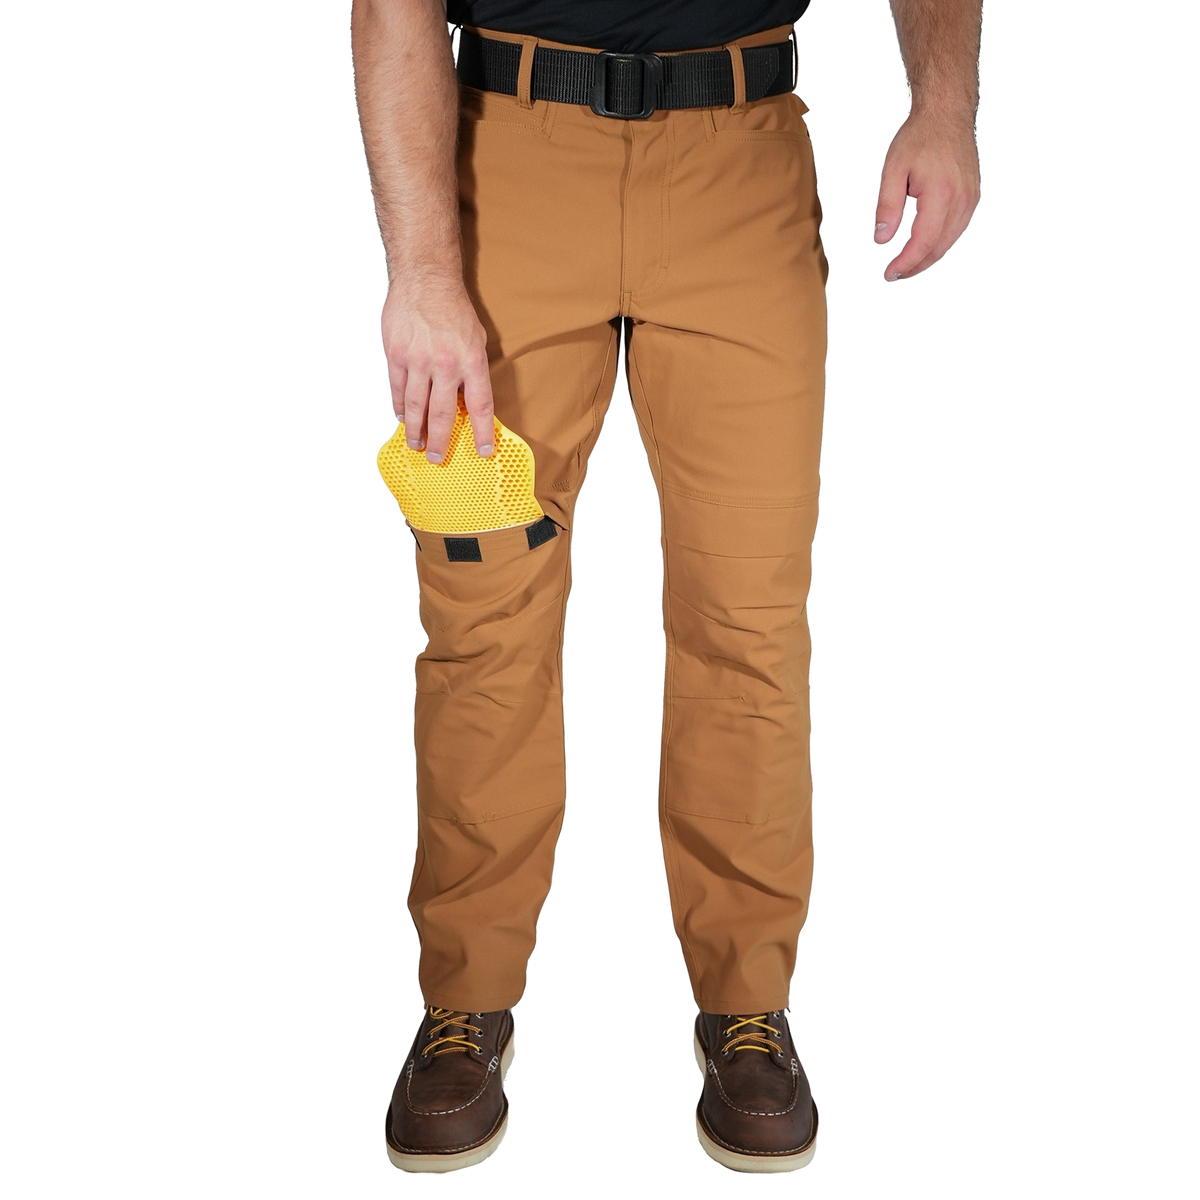 Dillon Pro 053 Knee Pad Work Pants: Great Protection, Unrestricted ...